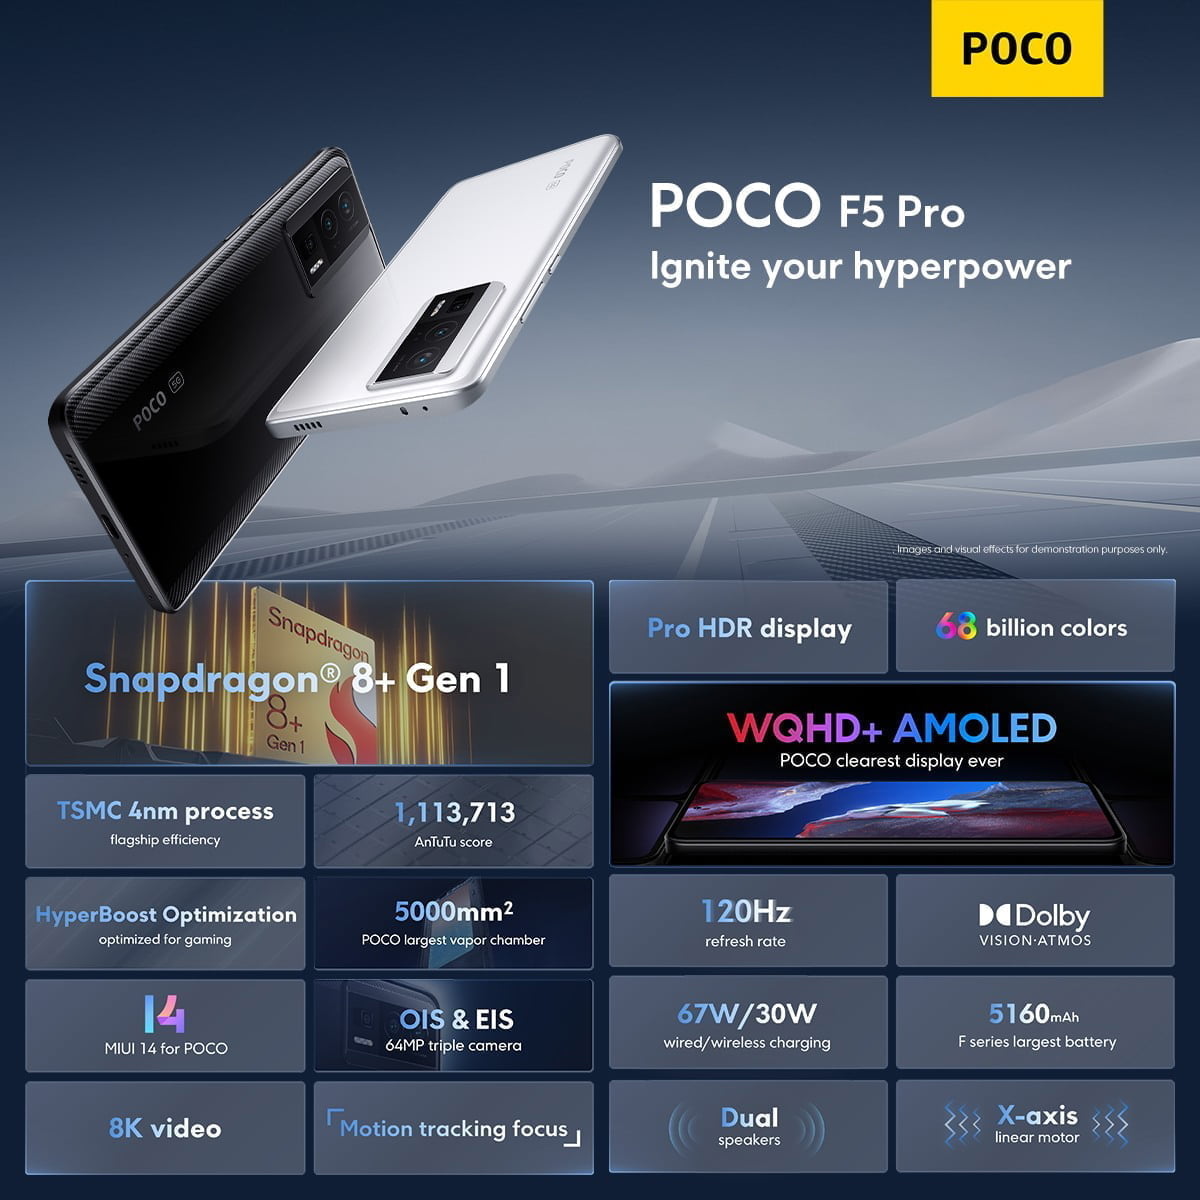 POCO F5 Pro review: Premium extras at an affordable price